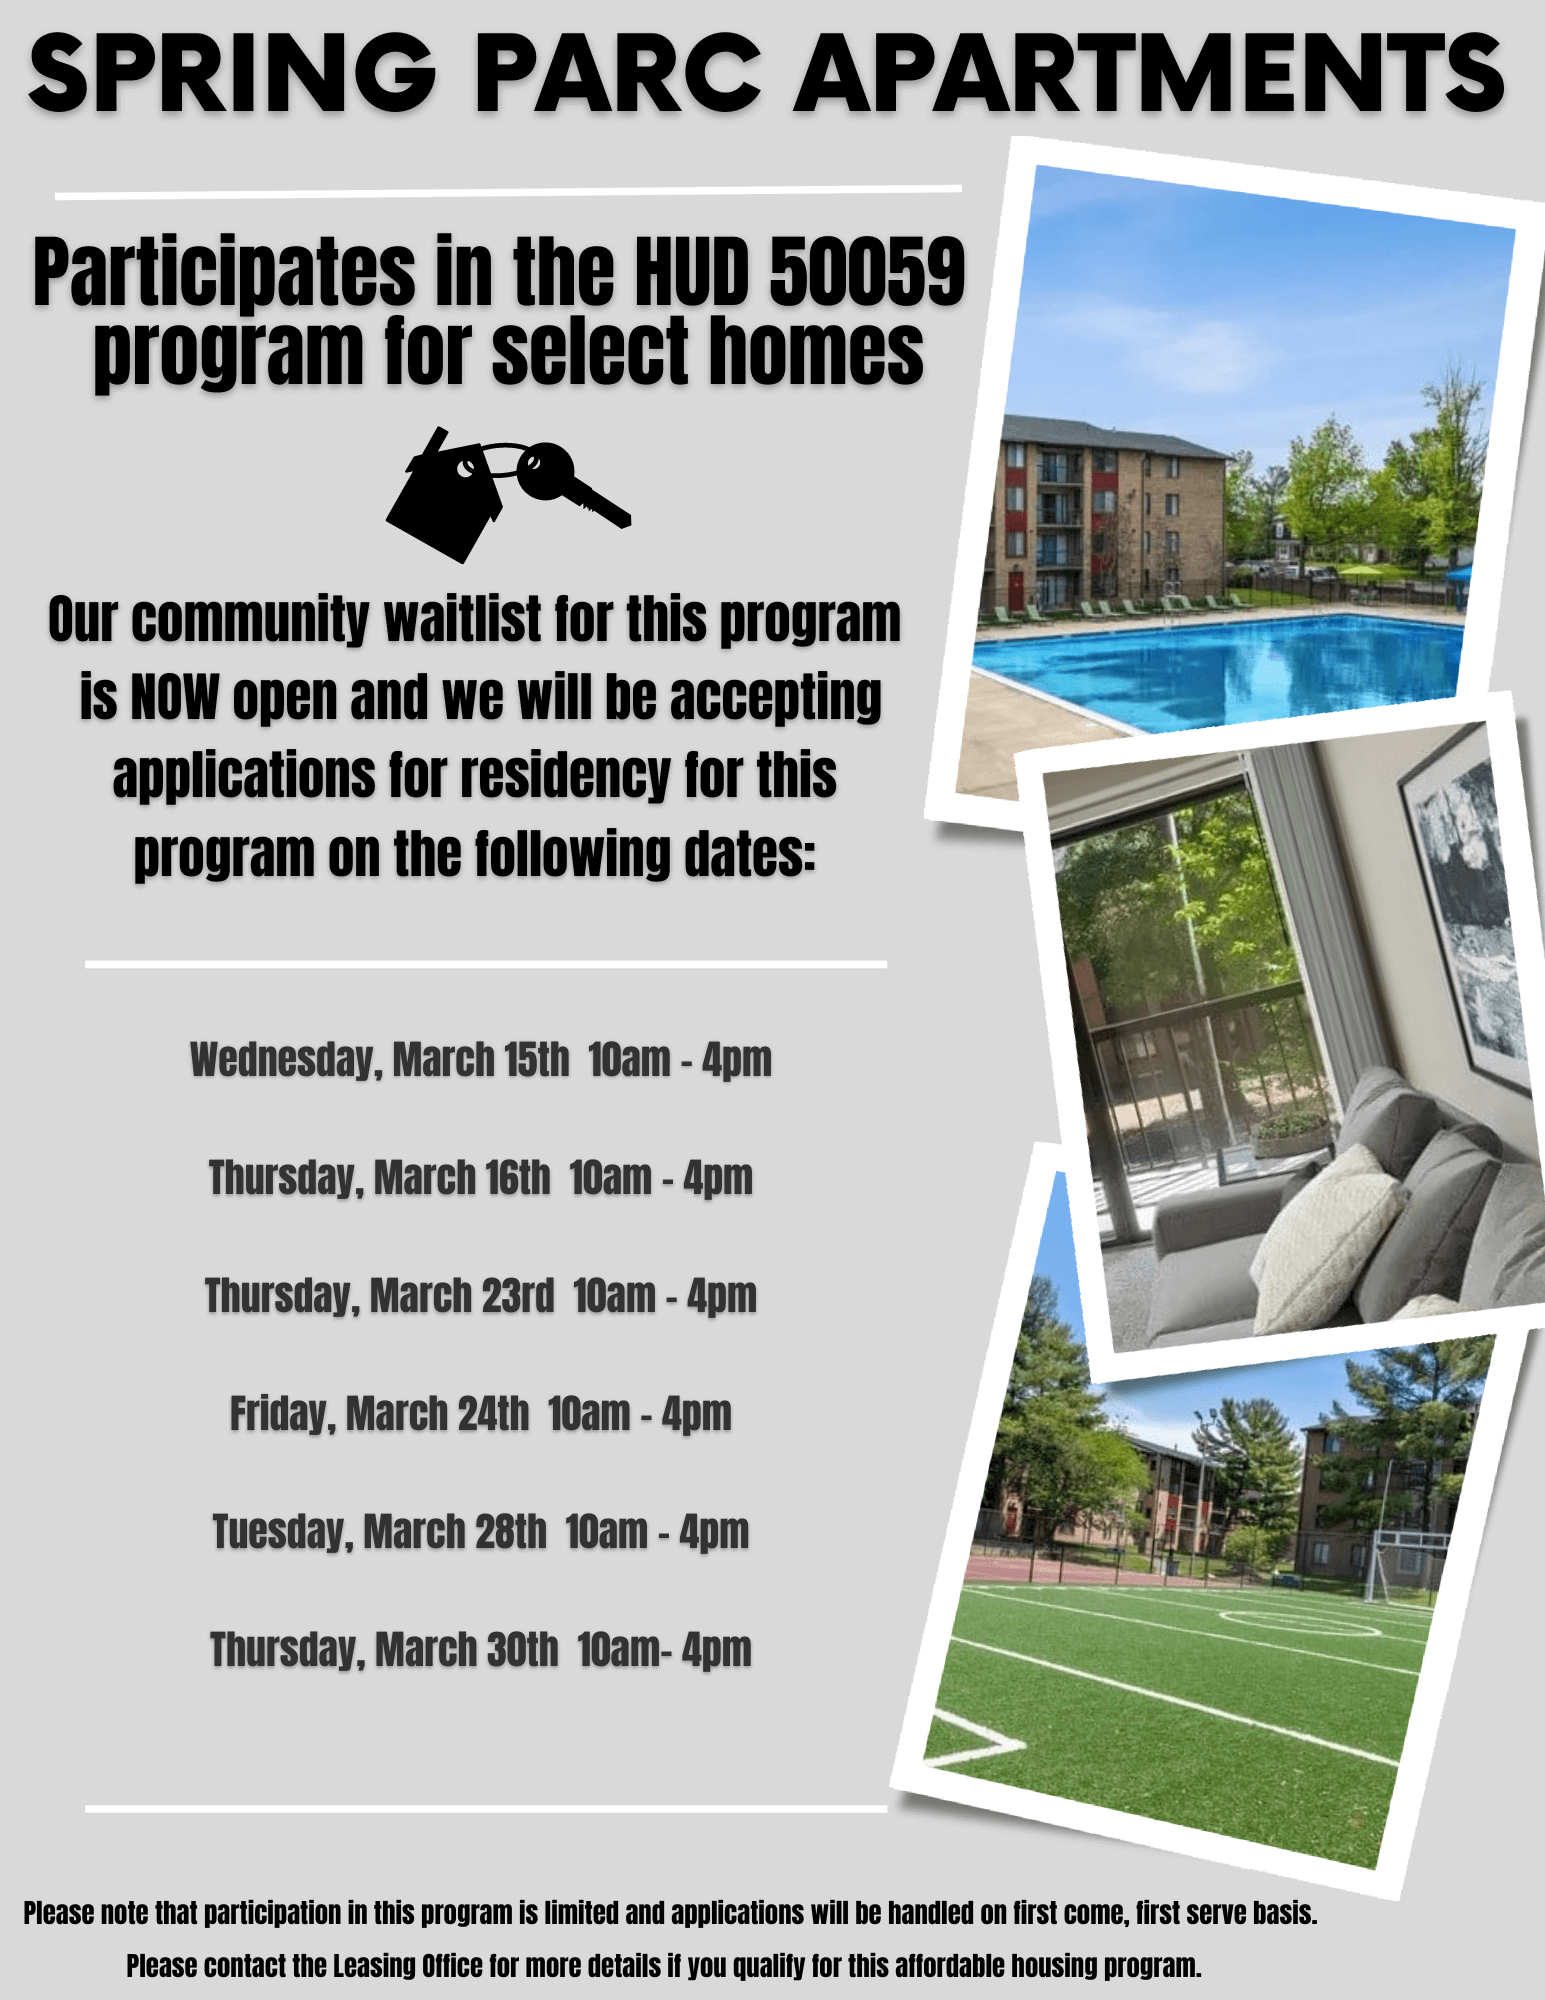 SPRING PARC Apartments Participates in the HUD 50059 program for select homes. Our community waitlist for this program is NOW open and we will be accepting applications for residency for this program on the following dates: 
Wednesday, March 15th 10am - 4pm Thursday, March 16th 10am - 4pm Thursday, March 23rd 10am - 4pm Friday, March 24th 10am - 4pm Tuesday, March 28th 10am - 4pm Thursday, March 30th 10am- 4pm. Please note that participation in this program is limited and applications will be handled on first come, first serve basis. Please contact the Leasing Office for more details if you quality for this affordable housing program.